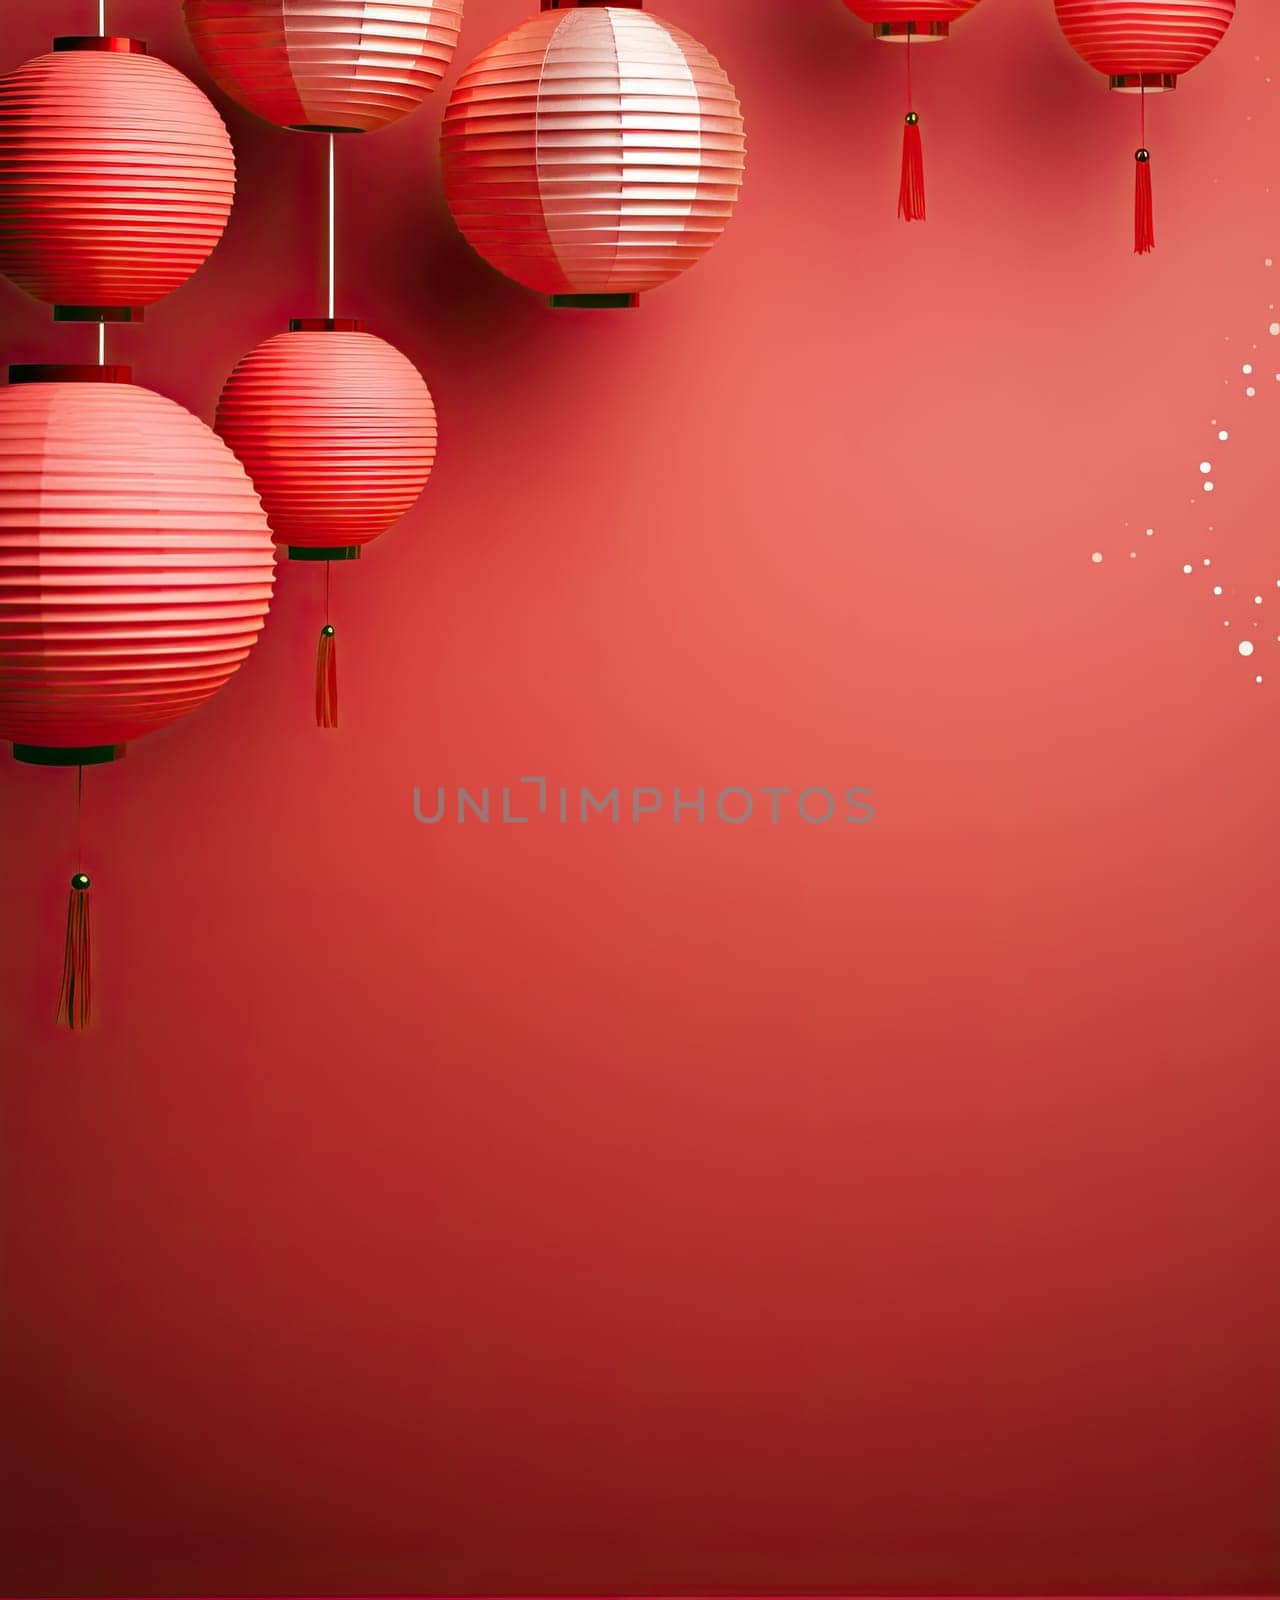 Typical chinese background template with lanterns isolated on red and copy space for text. Happy chinese new year by papatonic